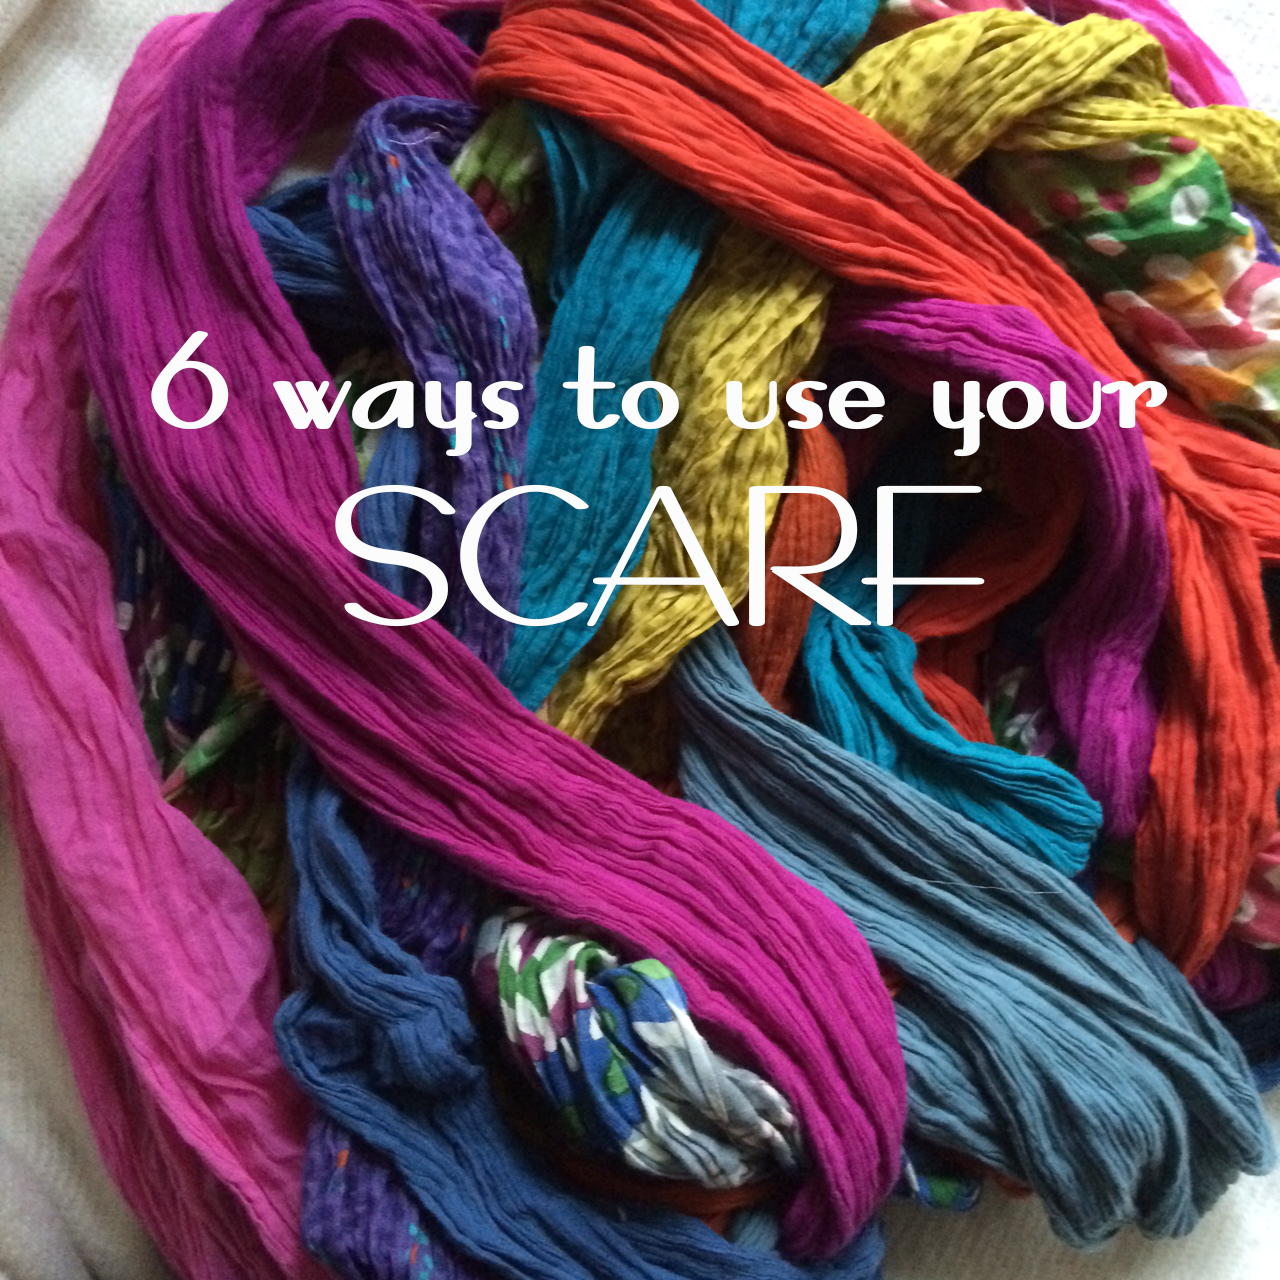 6 ways to use your scarf